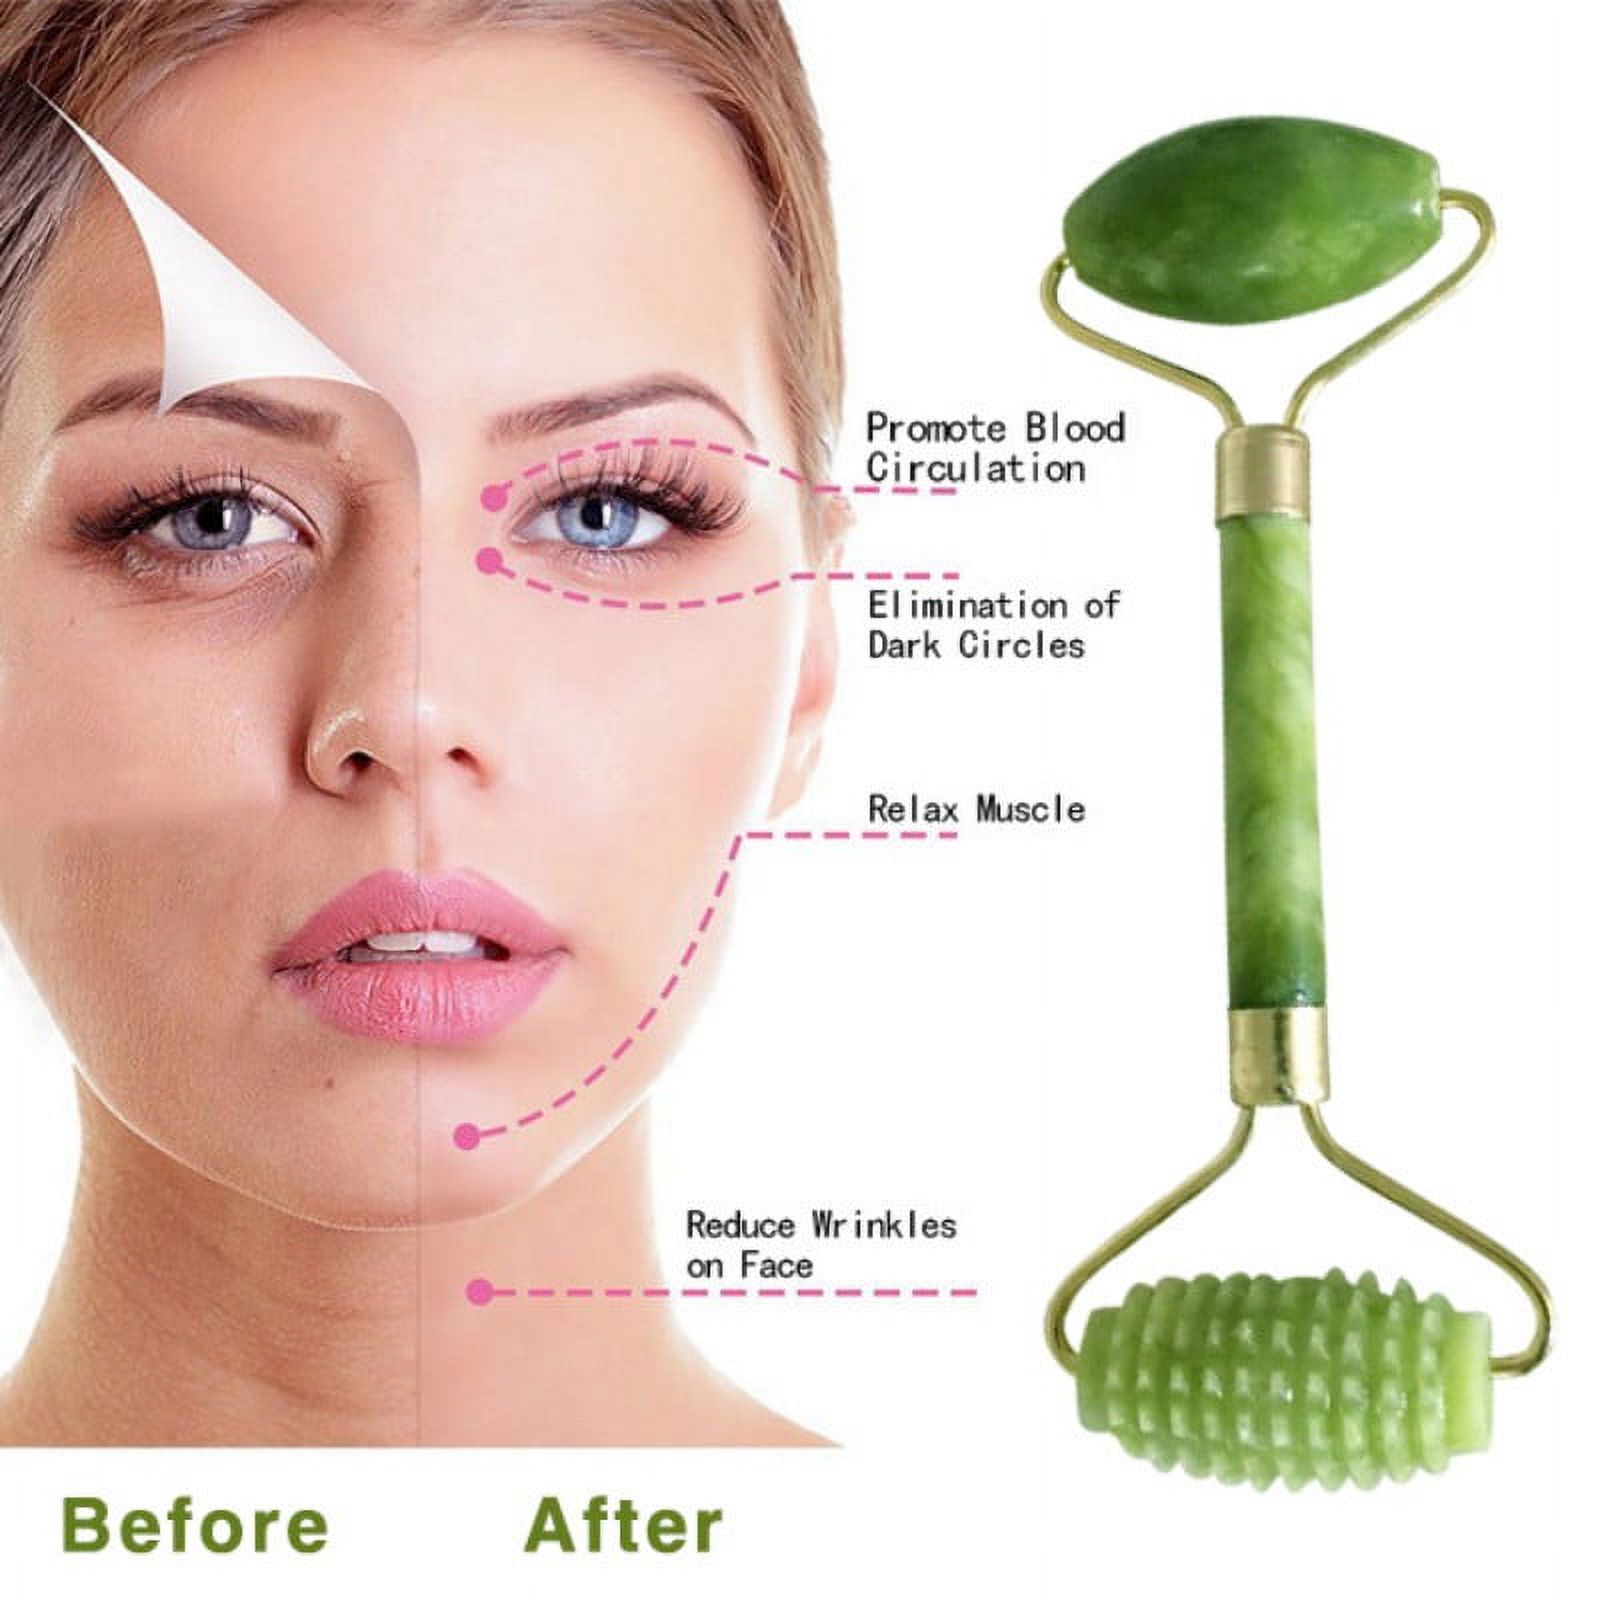 Facial Jade Massage Roller Remove Dark Circle Eye Bags Anti-Aging Massager For Promote Blood Circulation - image 4 of 4